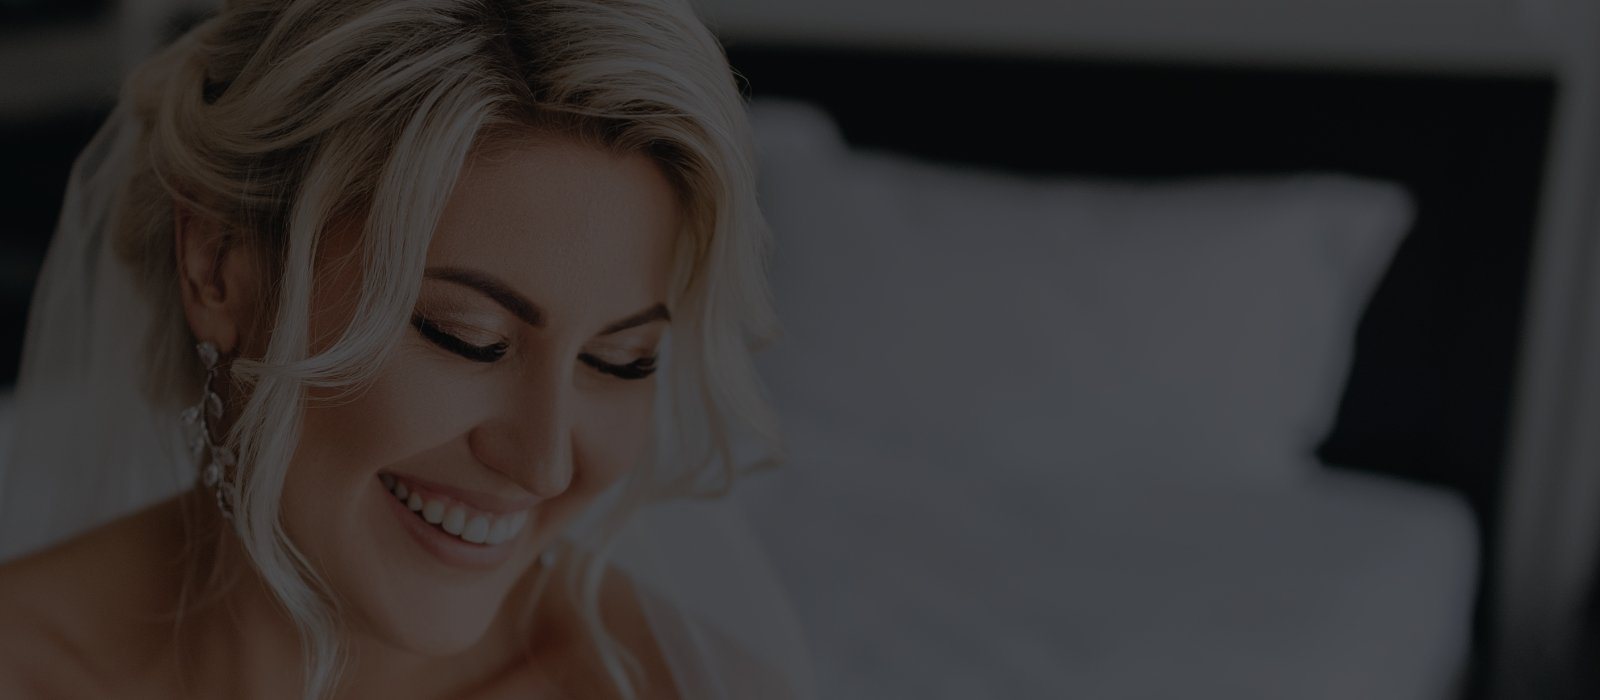 Smiling blonde woman sitting on bed with white sheets